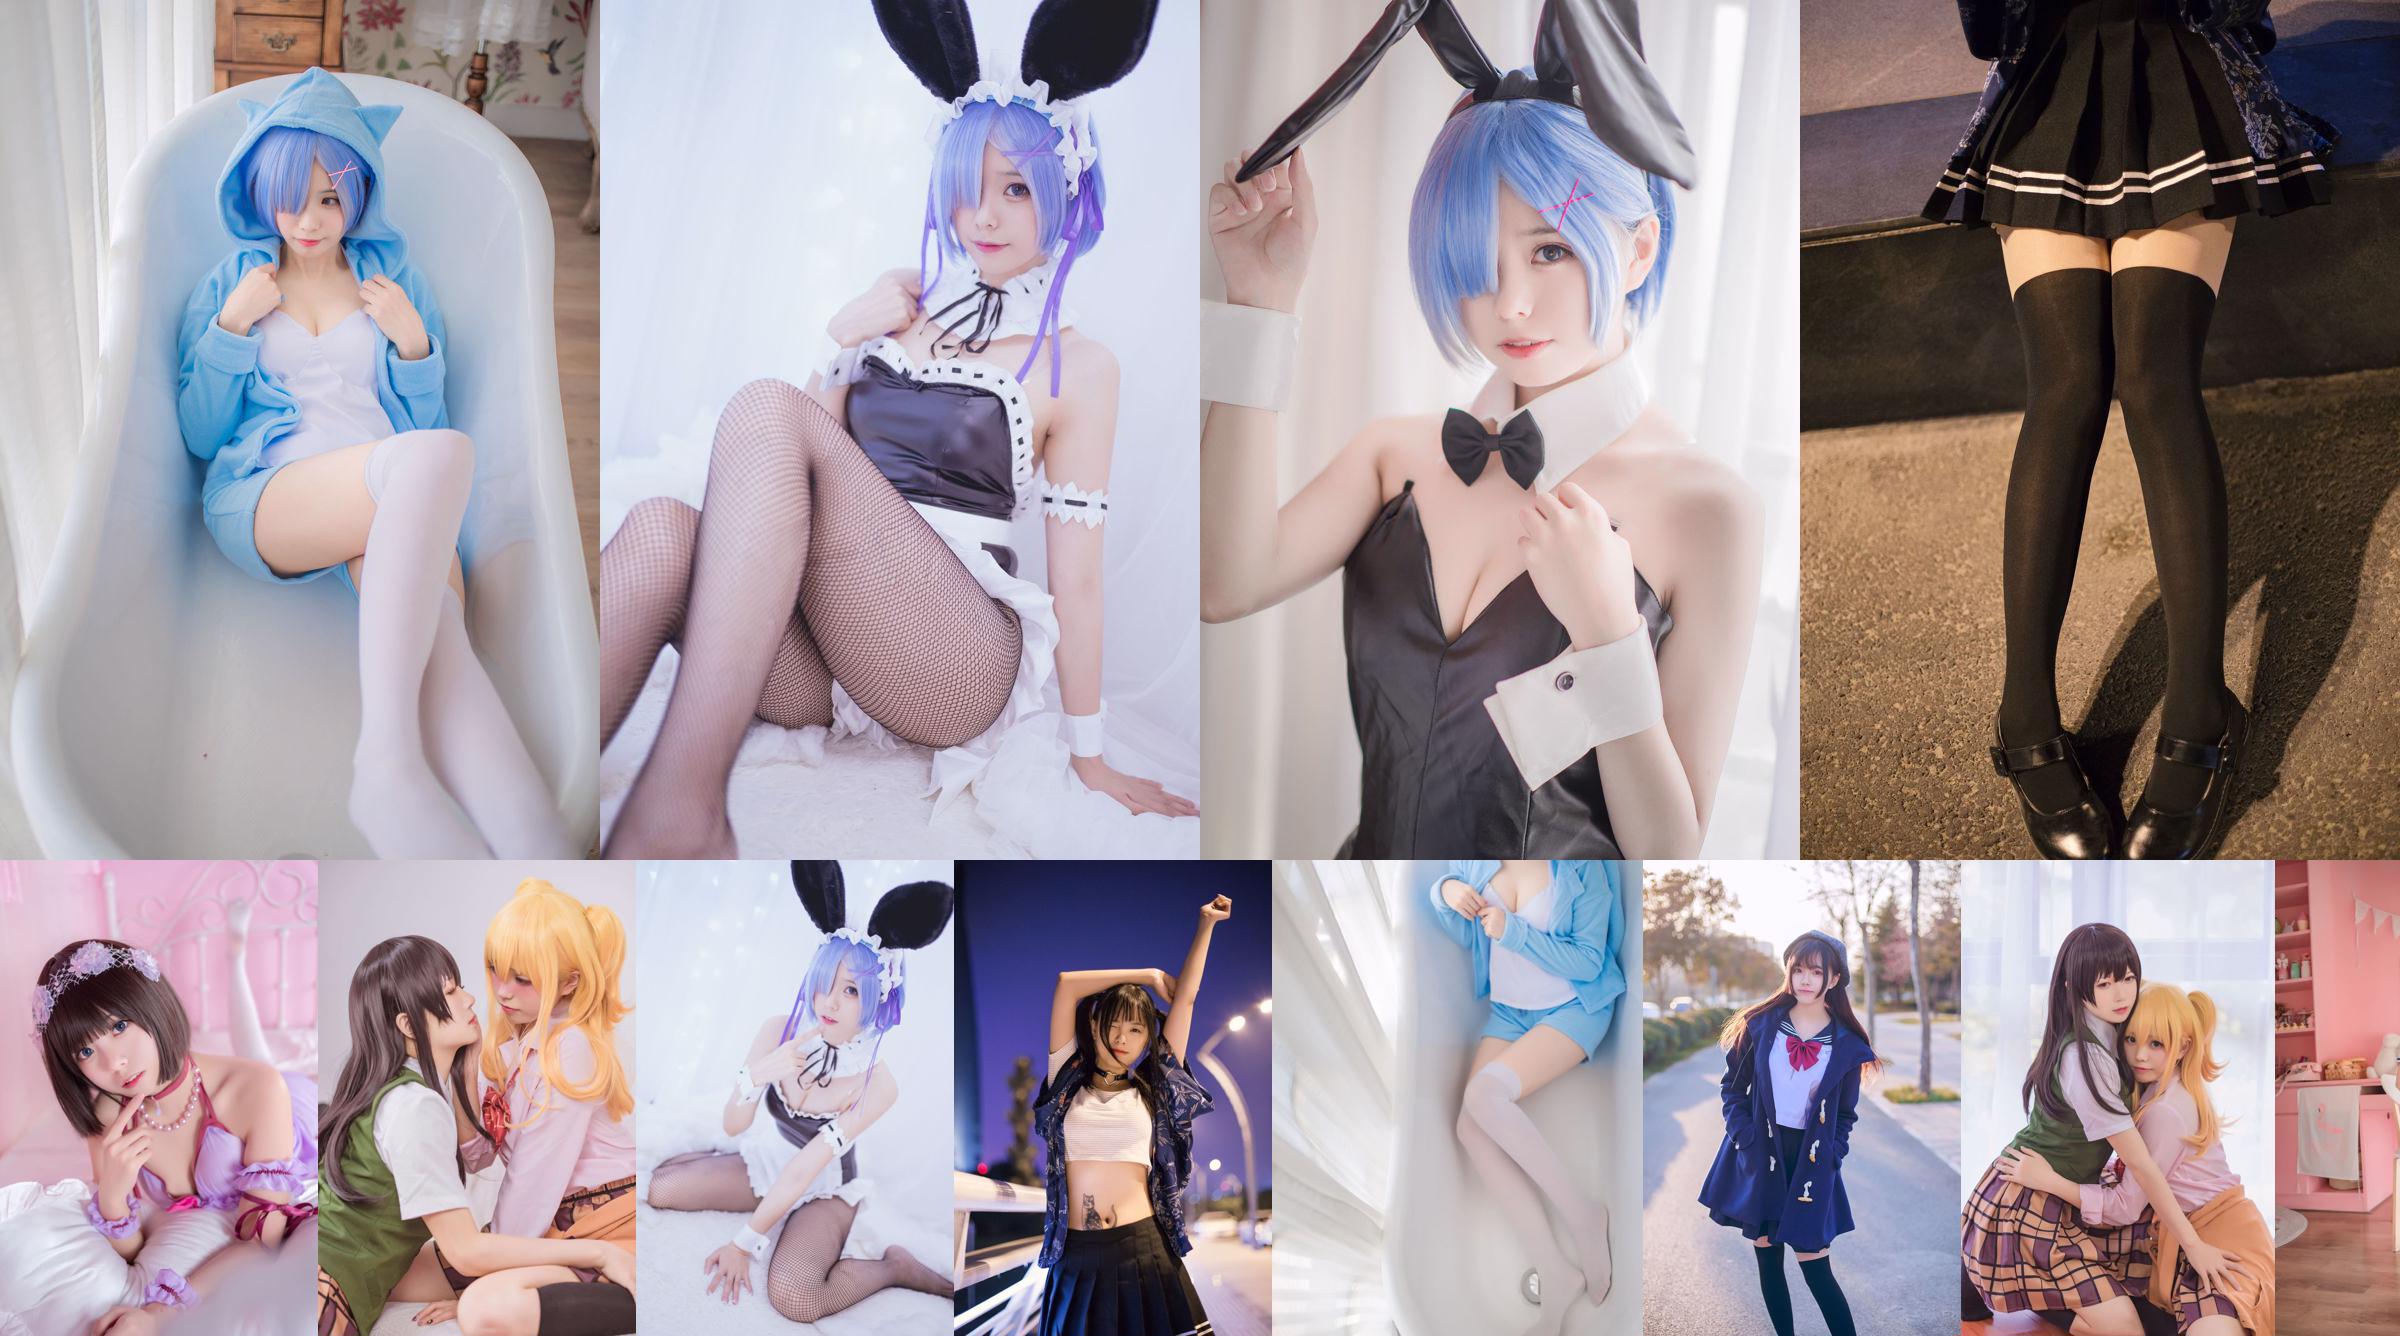 Zuster Ono met "Cat Swimsuit + Magical Girl Illiya" [COSPLAY Beauty] No.be5a63 Pagina 1